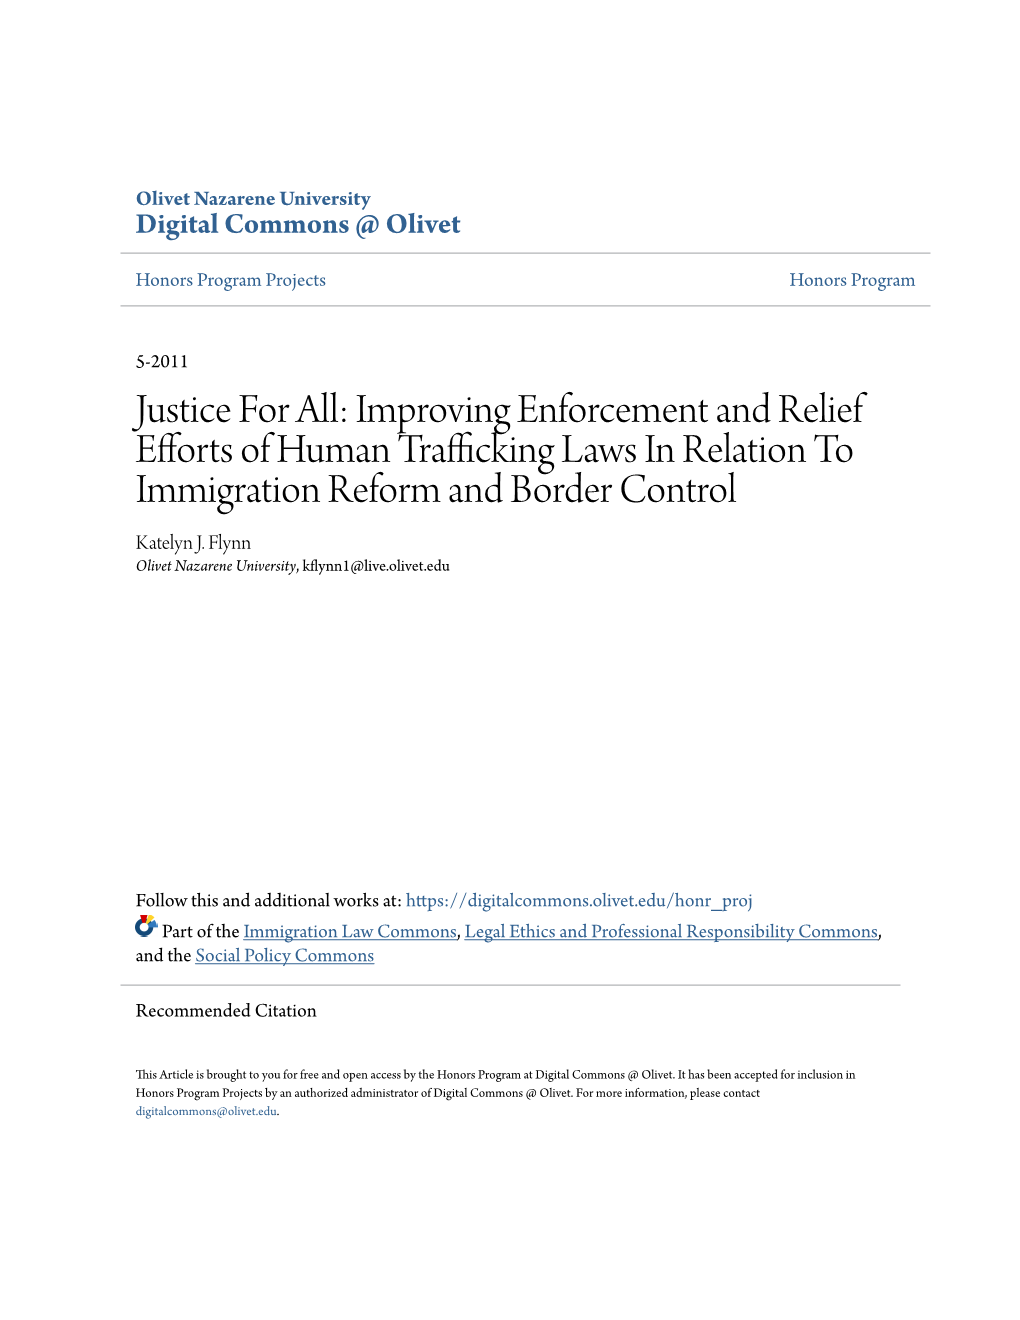 Improving Enforcement and Relief Efforts of Human Trafficking Laws in Relation to Immigration Reform and Border Control Katelyn J